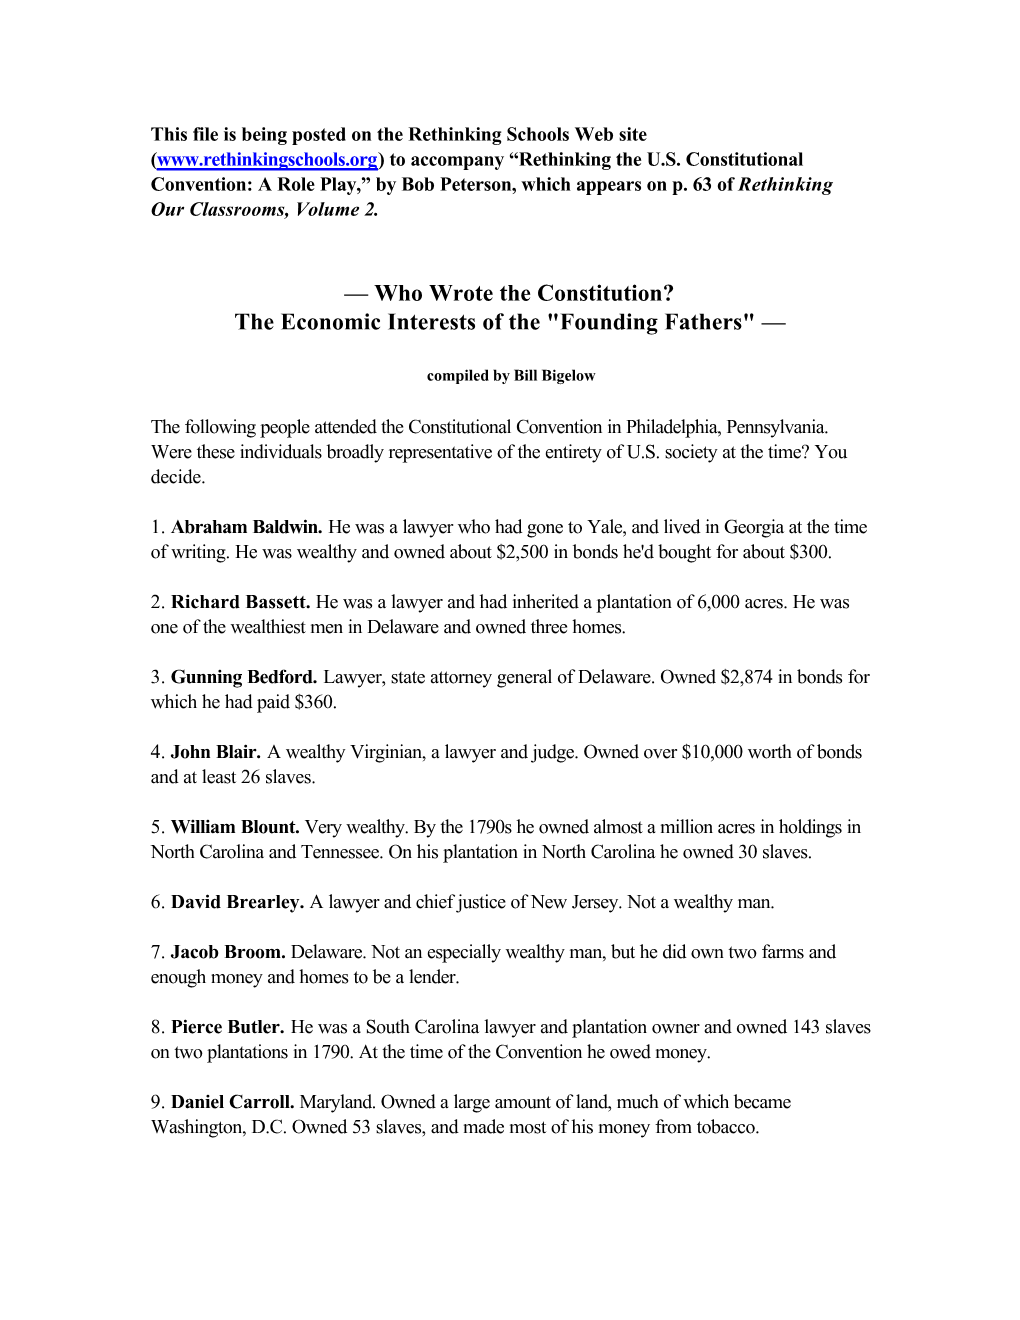 The Economic Interests of the "Founding Fathers" —